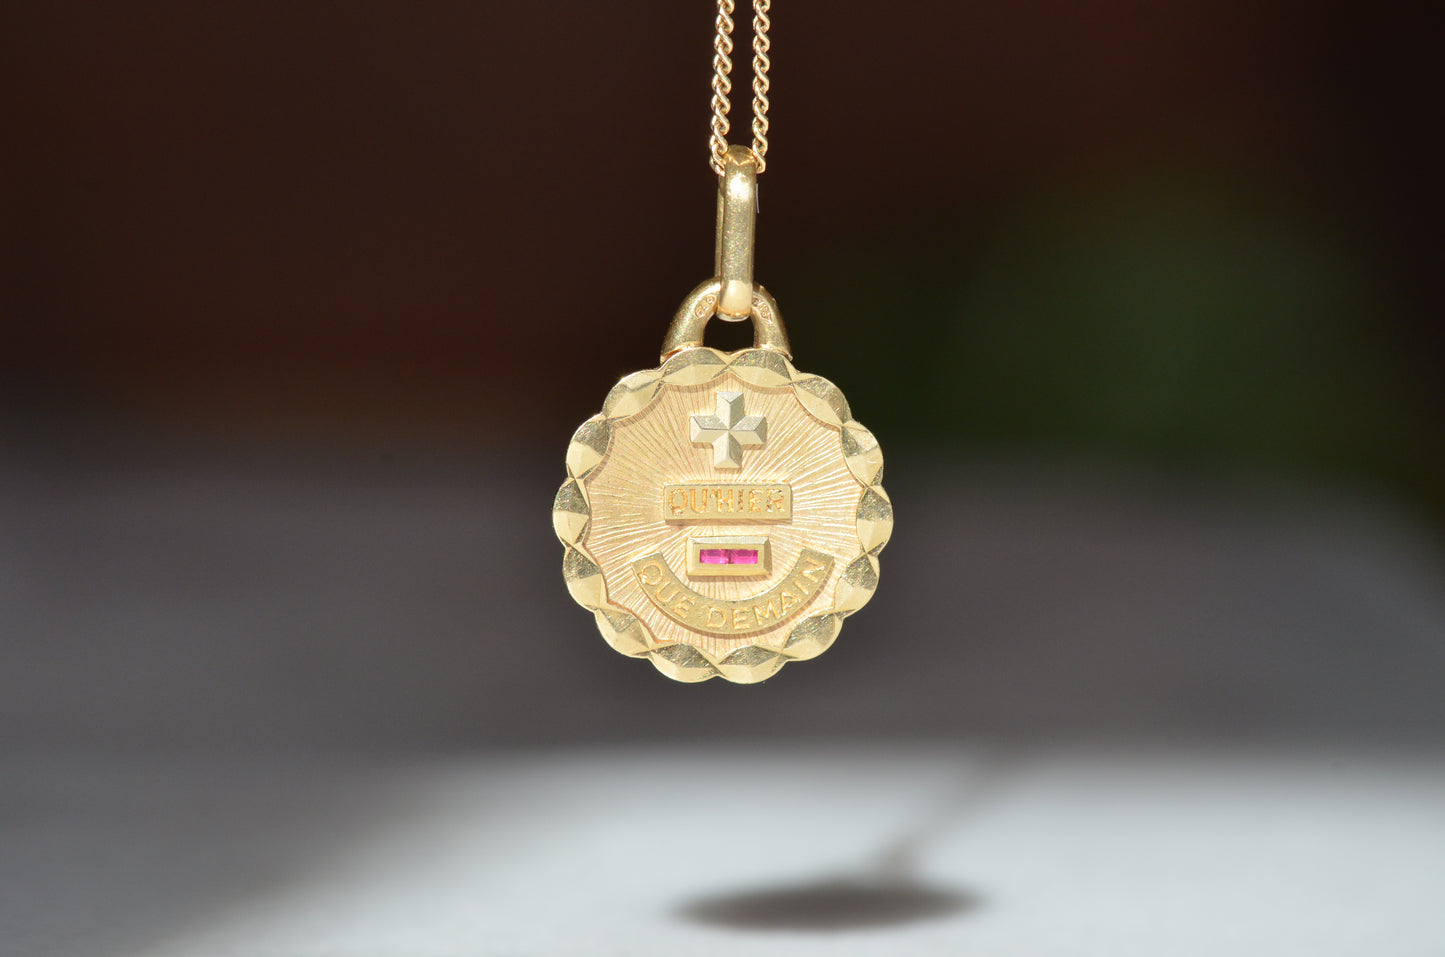 Small Vintage Scalloped Médaille d'Amour